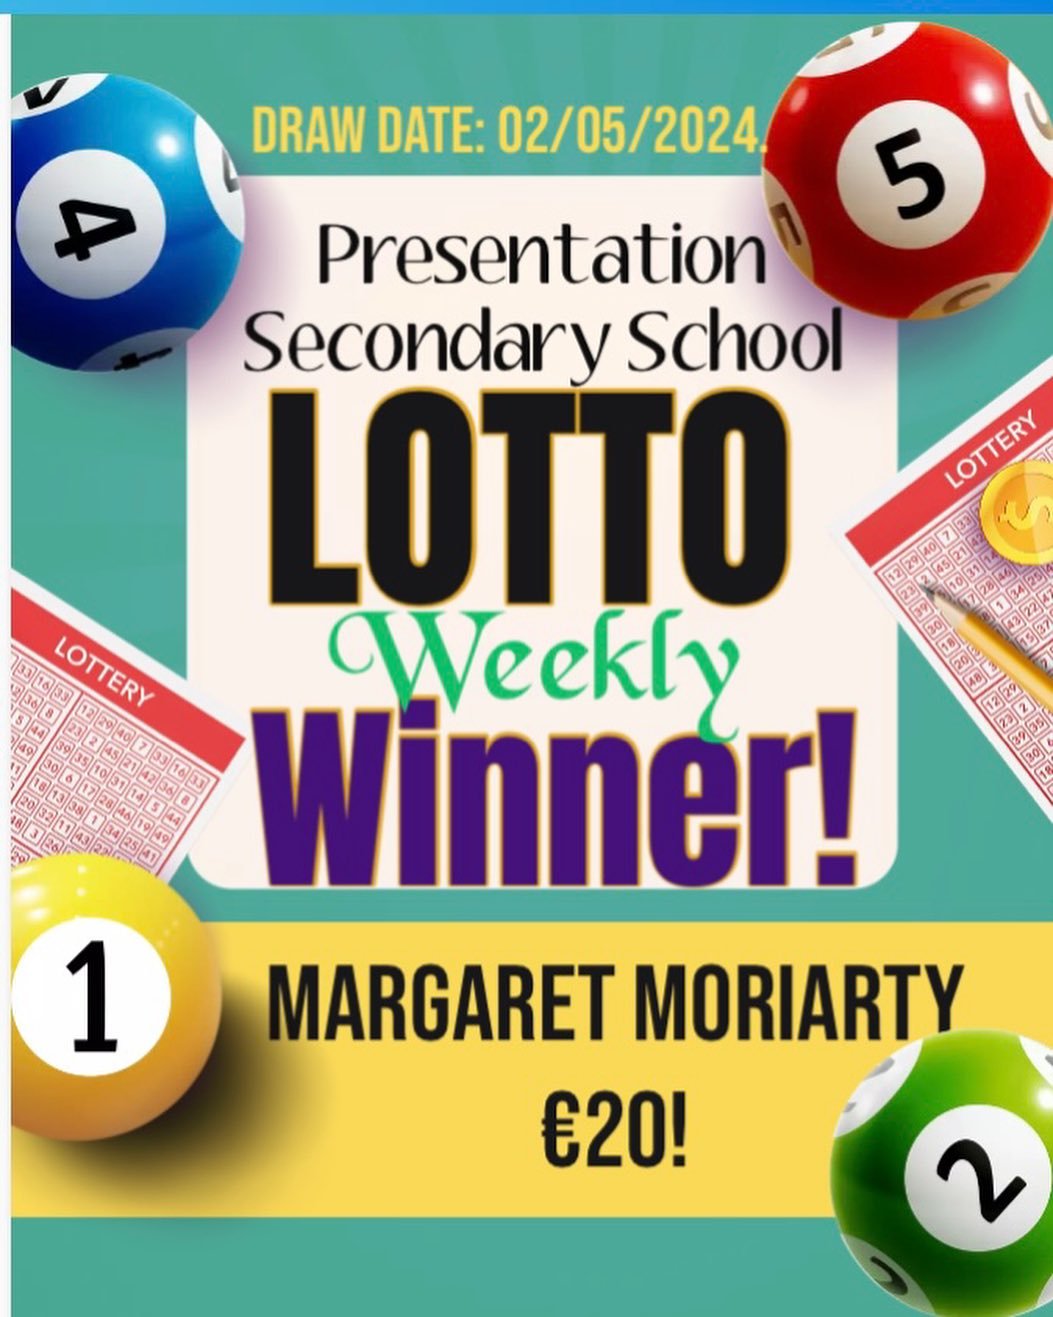 LOTTO WEEKLY WINNER! Congratulations to our very own Margaret Moriarty in the office, winner of this weeks Lotto draw of &euro;20. The main jackpot rolls over to next week. 

Again, many thanks for your support. If you can contribute 3 lines for &eur